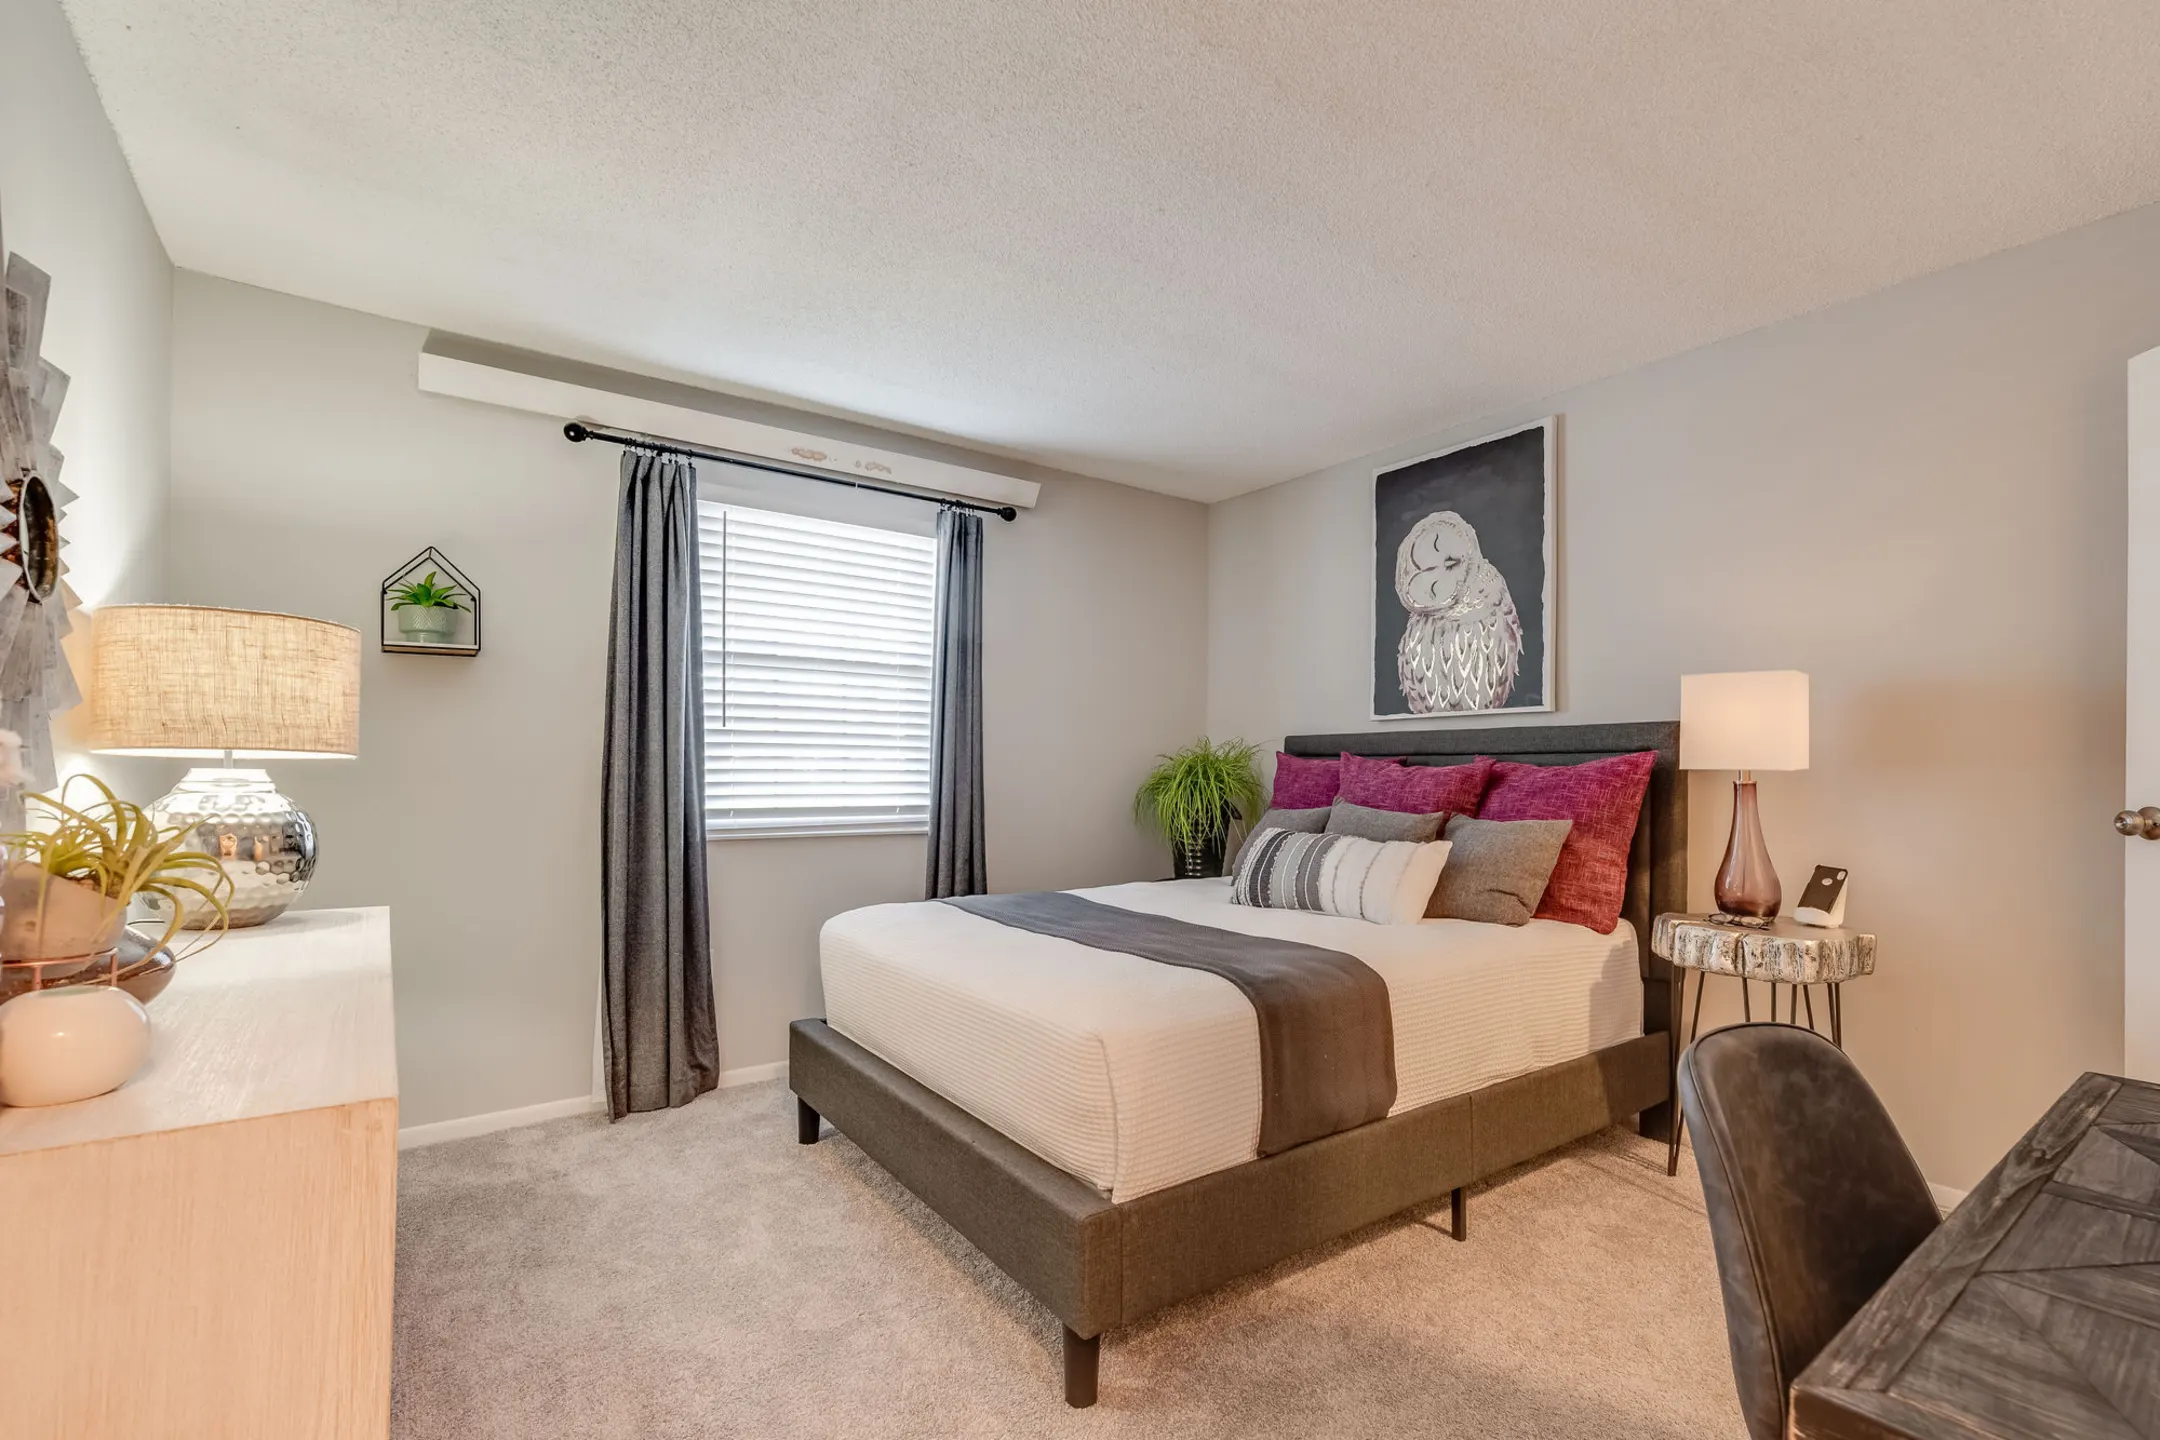 Bedroom - Pierpont Apartments - Westerville, OH